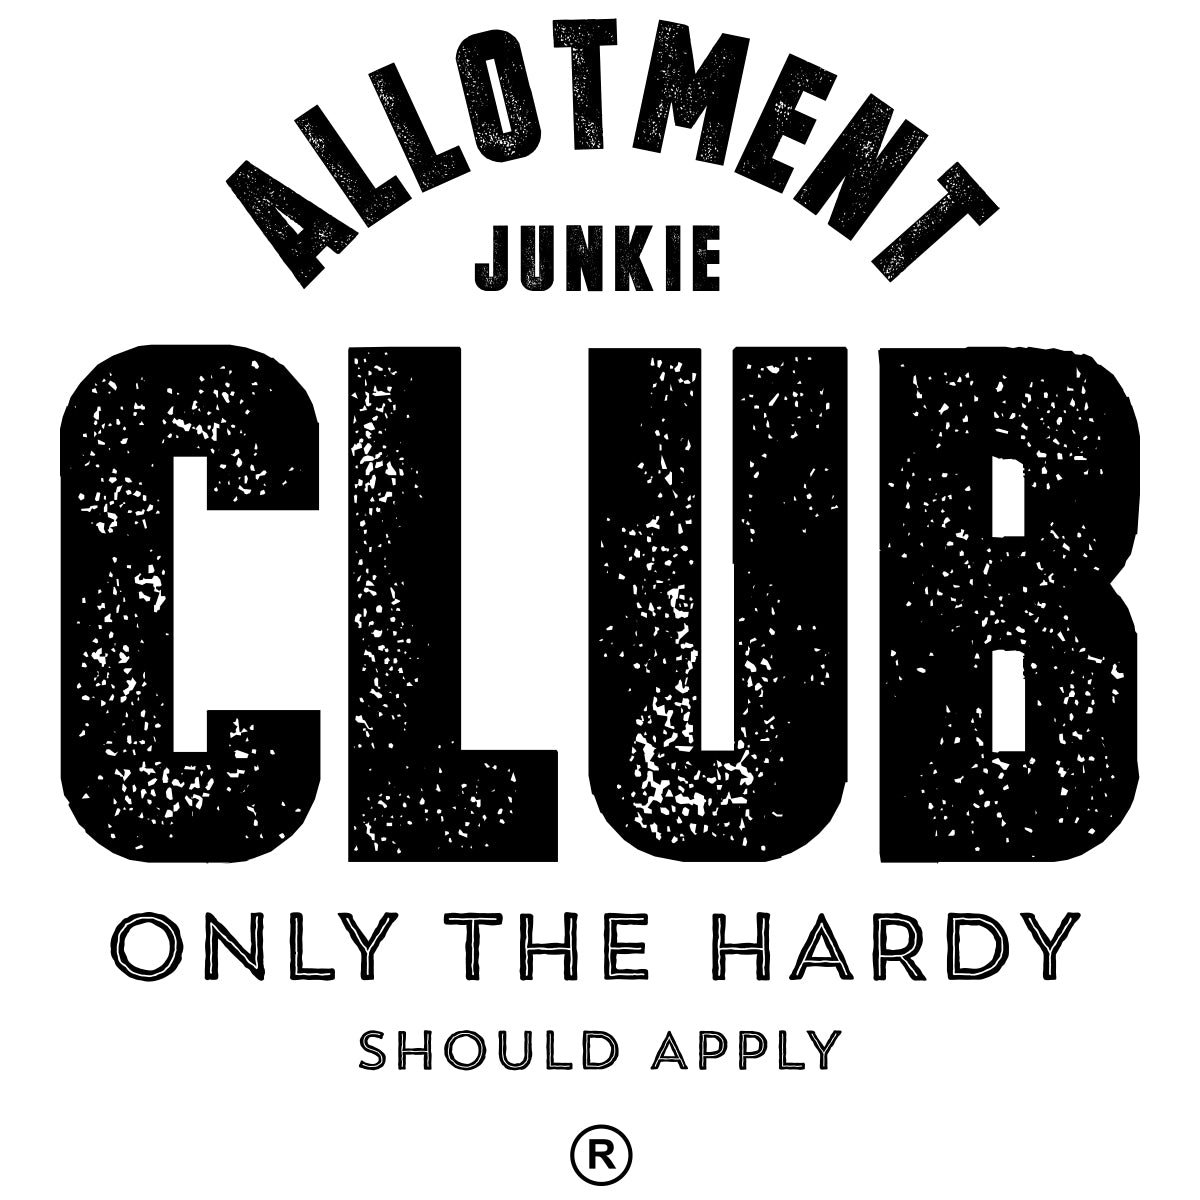 Allotment Junkie Club - Only the hardy should apply. Black and white logo, emblem style graphic